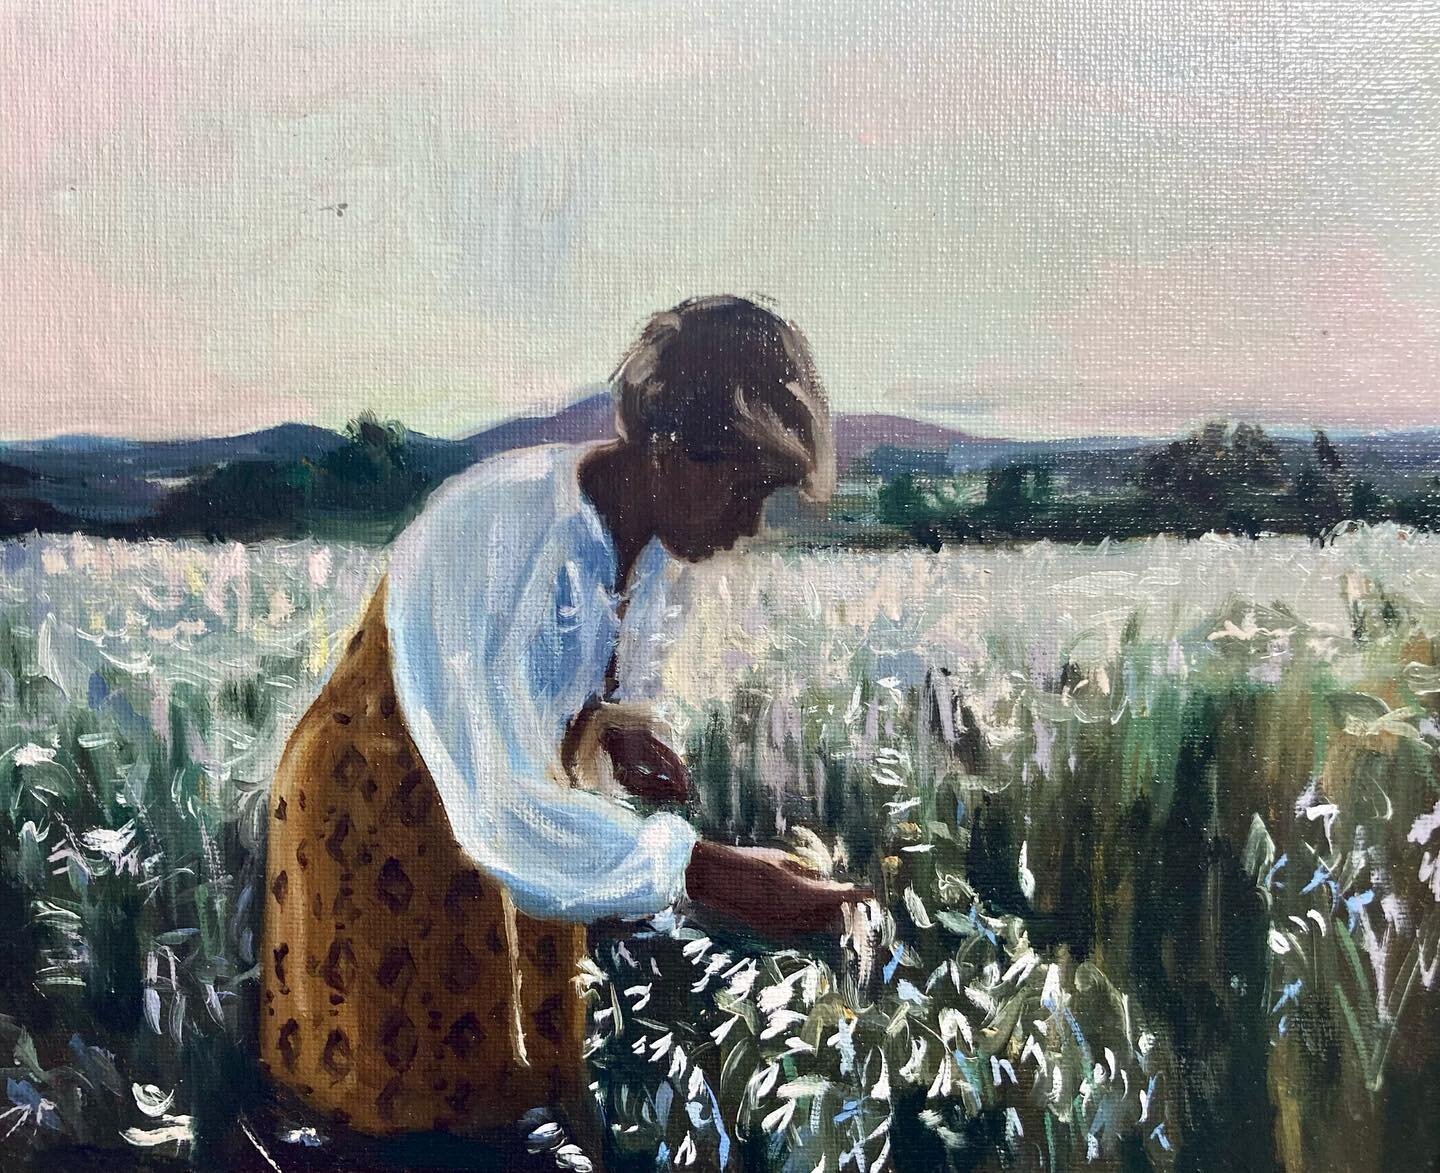 How could we not end up playing in these fields? 🪶
.
.
.
@ingrid24f thank you for the amazing photoshoot 🌺🥰
#oilpainting #photography #landscape #figurativeart #artoftheday